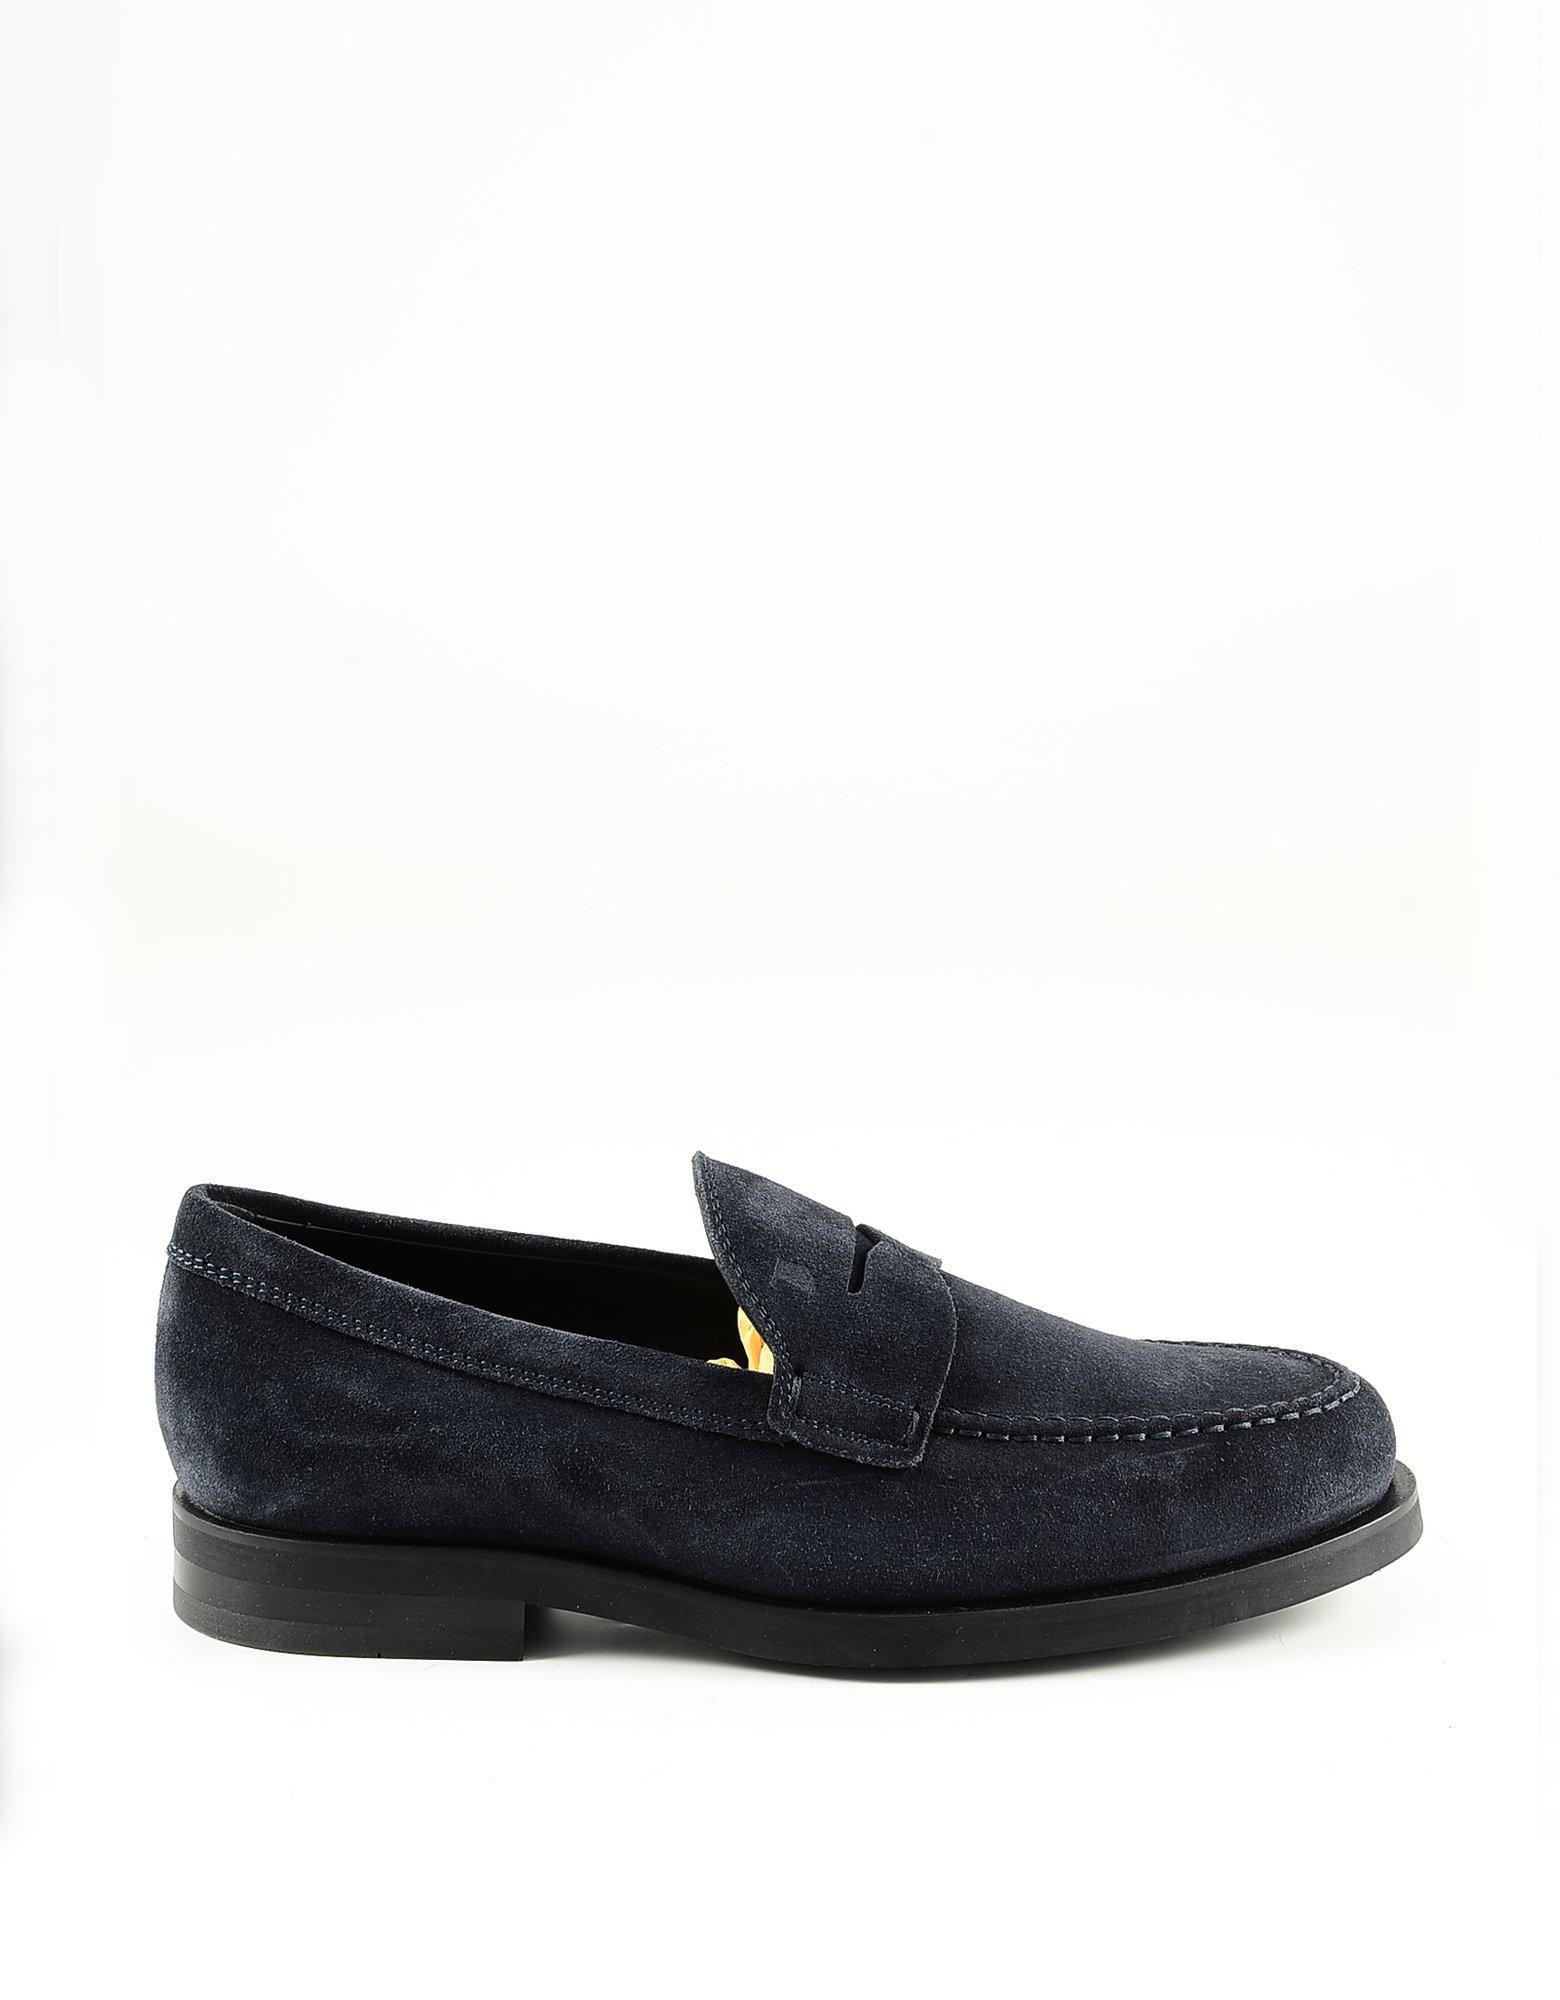 Tod's Blue Suede Men's Loafer Shoe 41 IT at FORZIERI UK